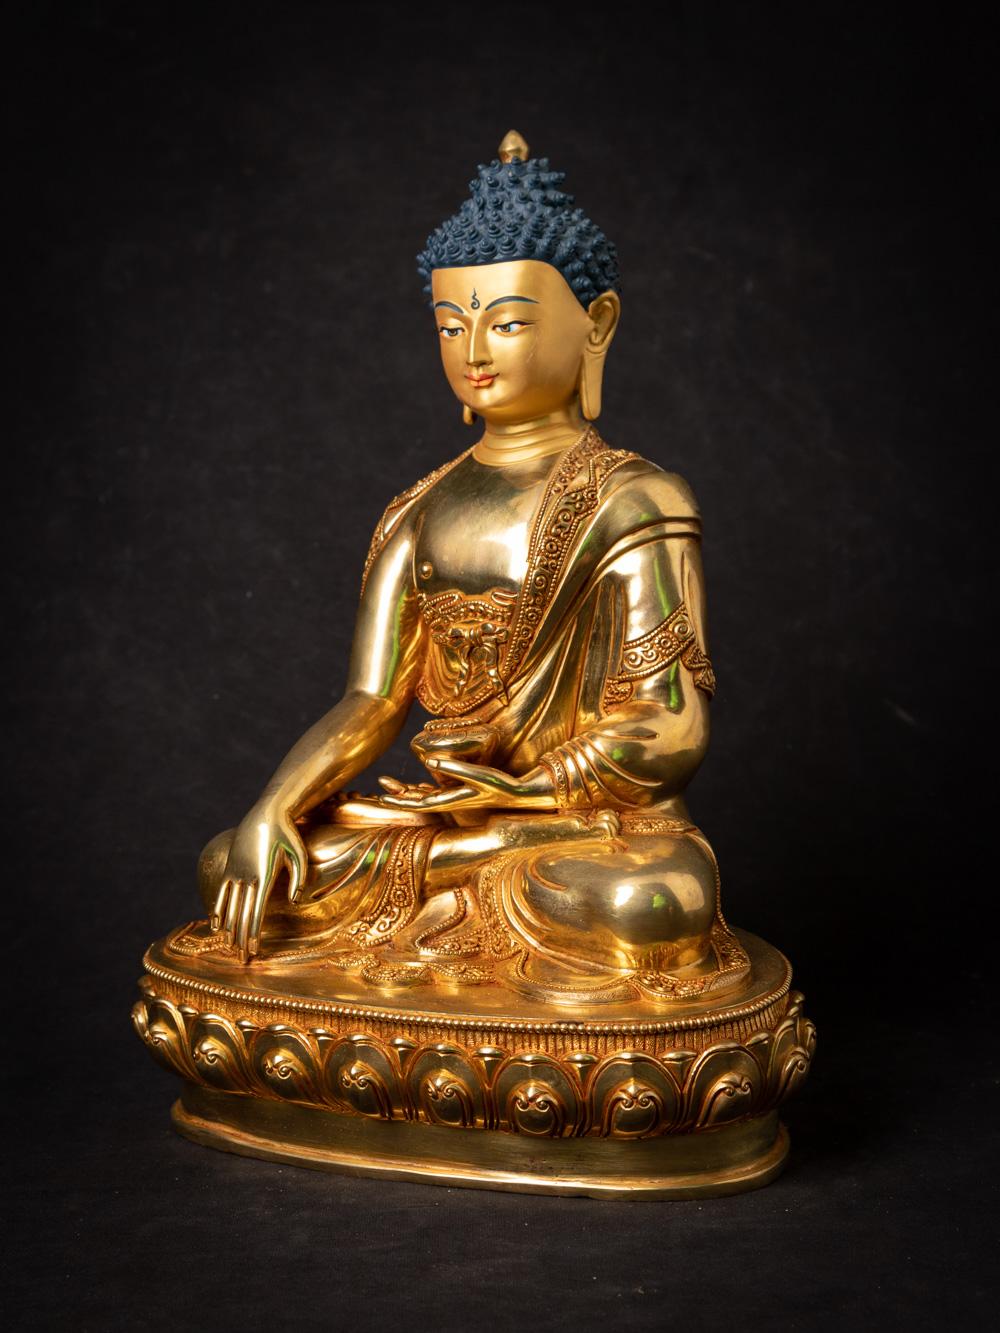 The high-quality Nepali Gold-Face Buddha is a truly exquisite and spiritually significant artifact originating from Nepal. Crafted from bronze and fire gilded with 24-karat gold, this Buddha statue stands at 33.3 cm in height and measures 24 cm in